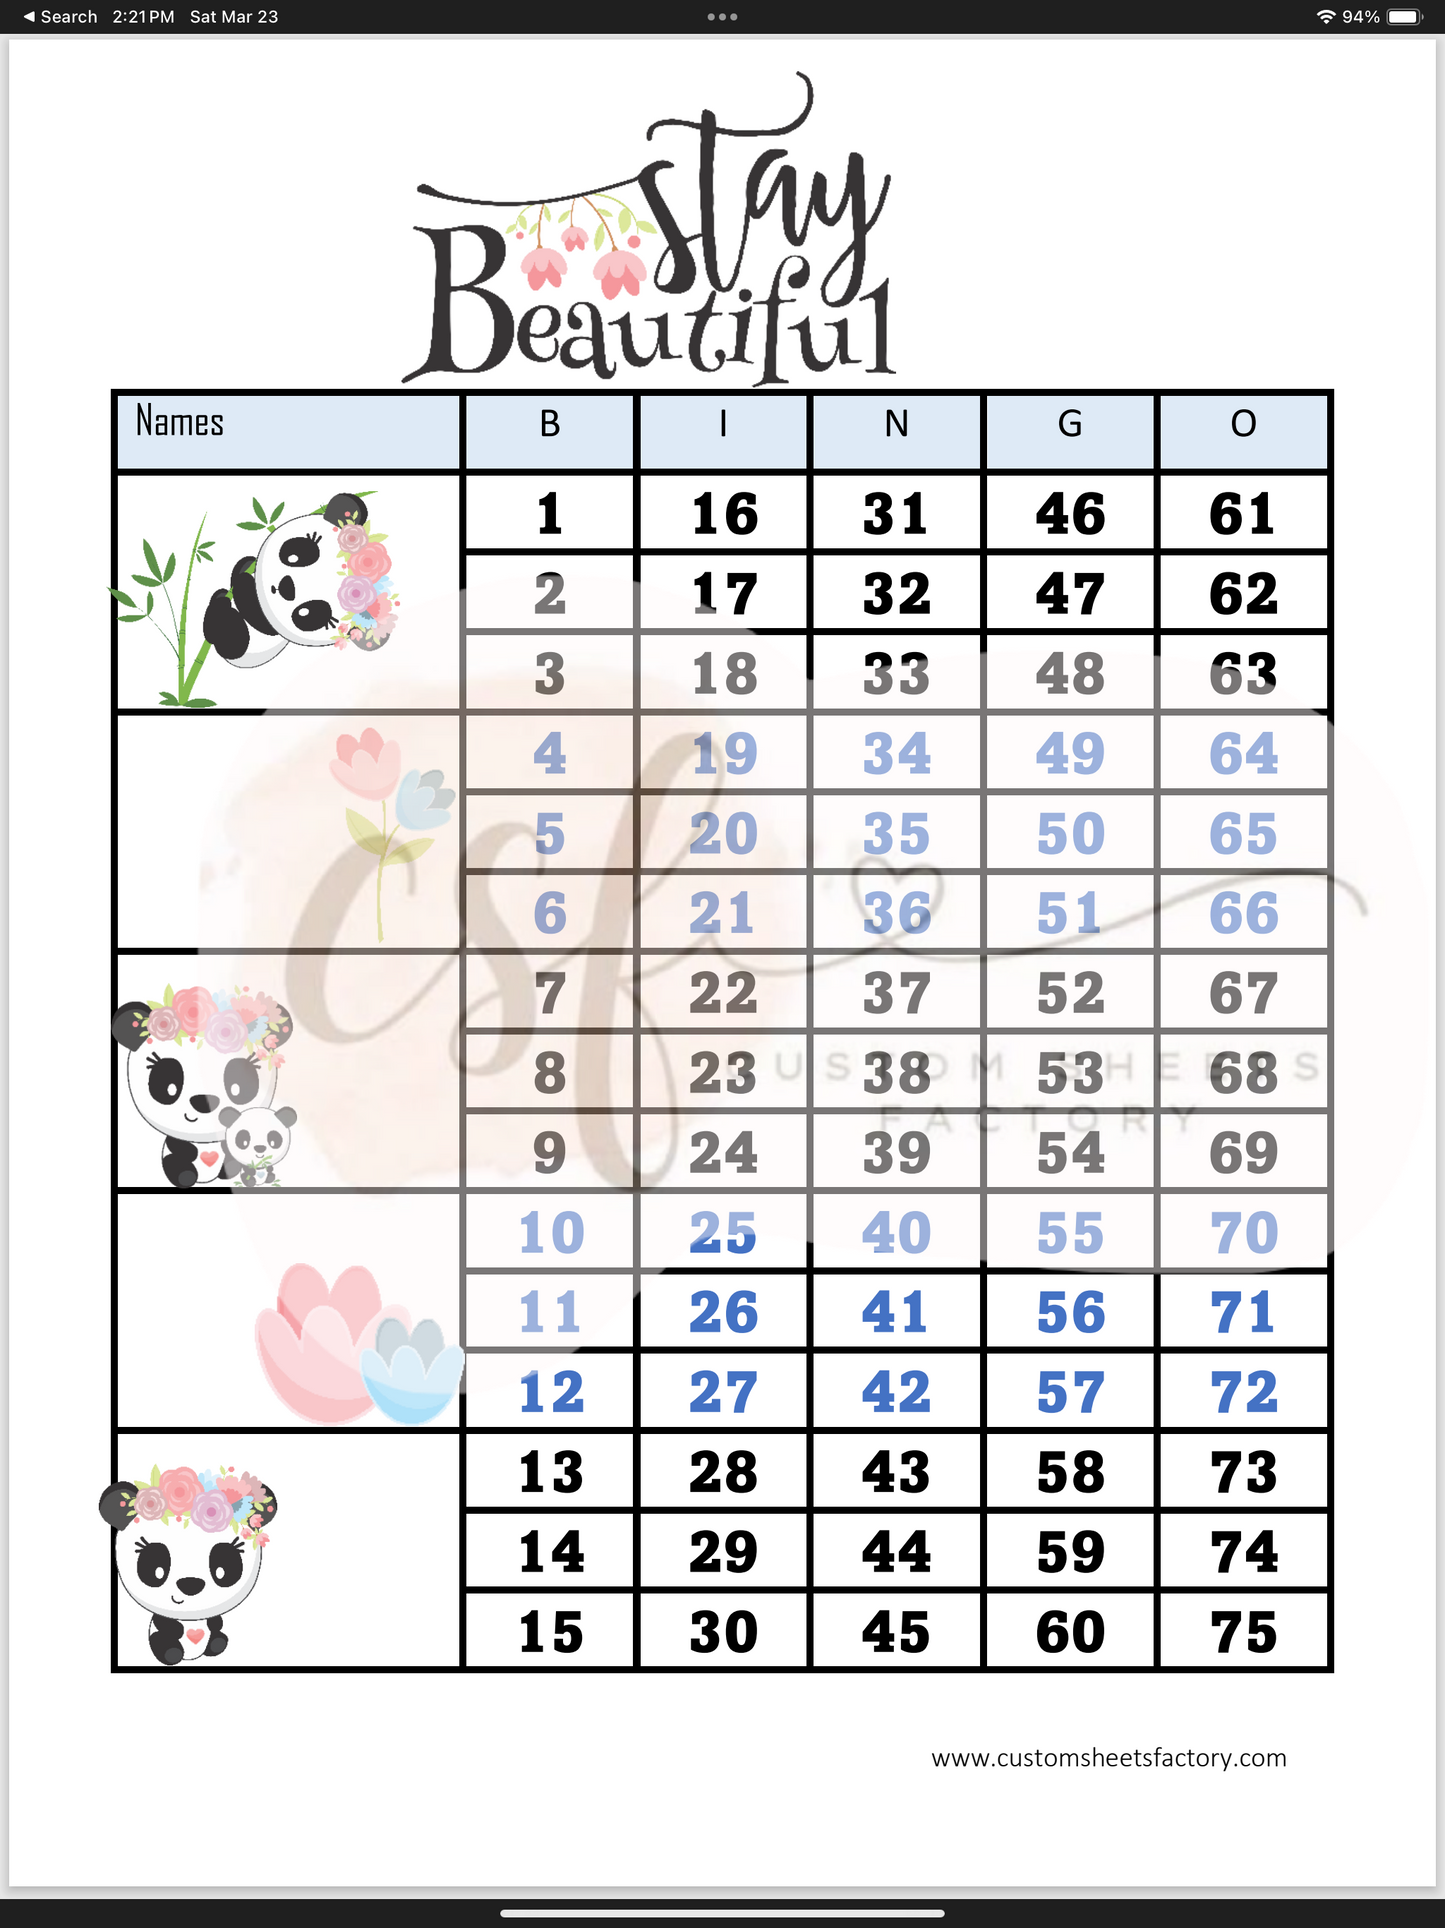 Stay Beautiful - Various Designs